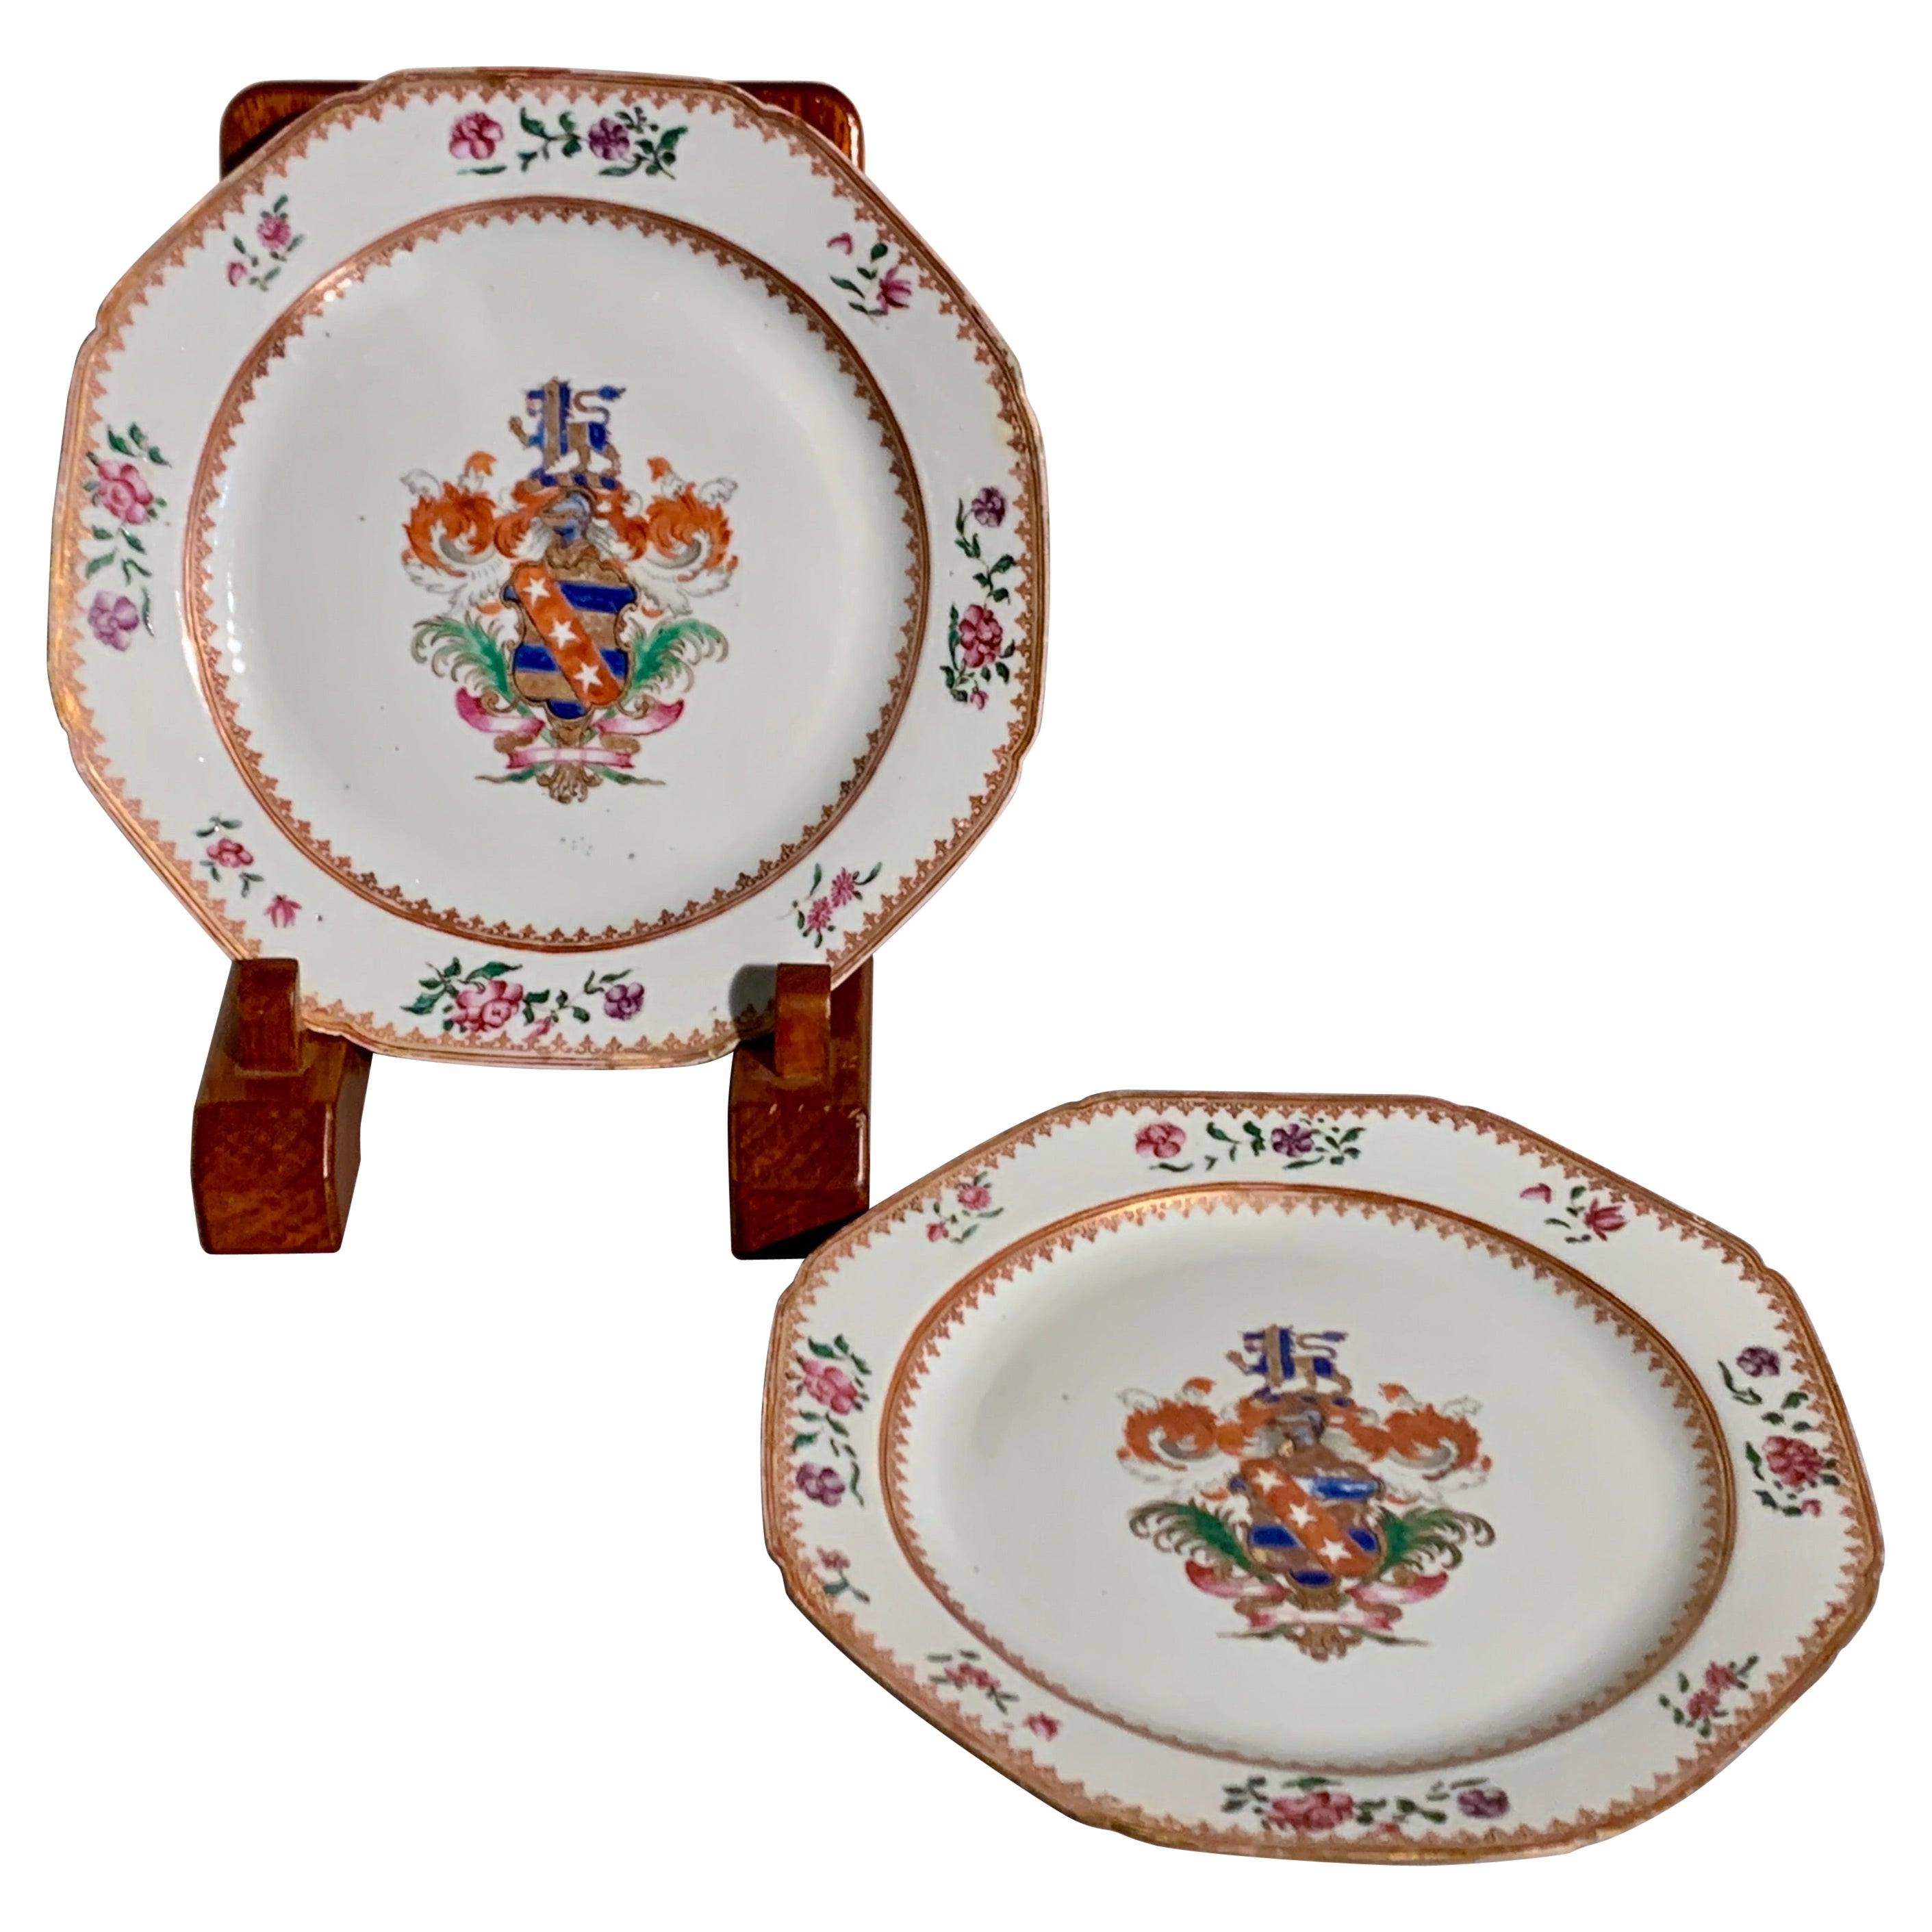 Pair Chinese Export Porcelain Permbridge Armorial Plates, mid 18th c, China